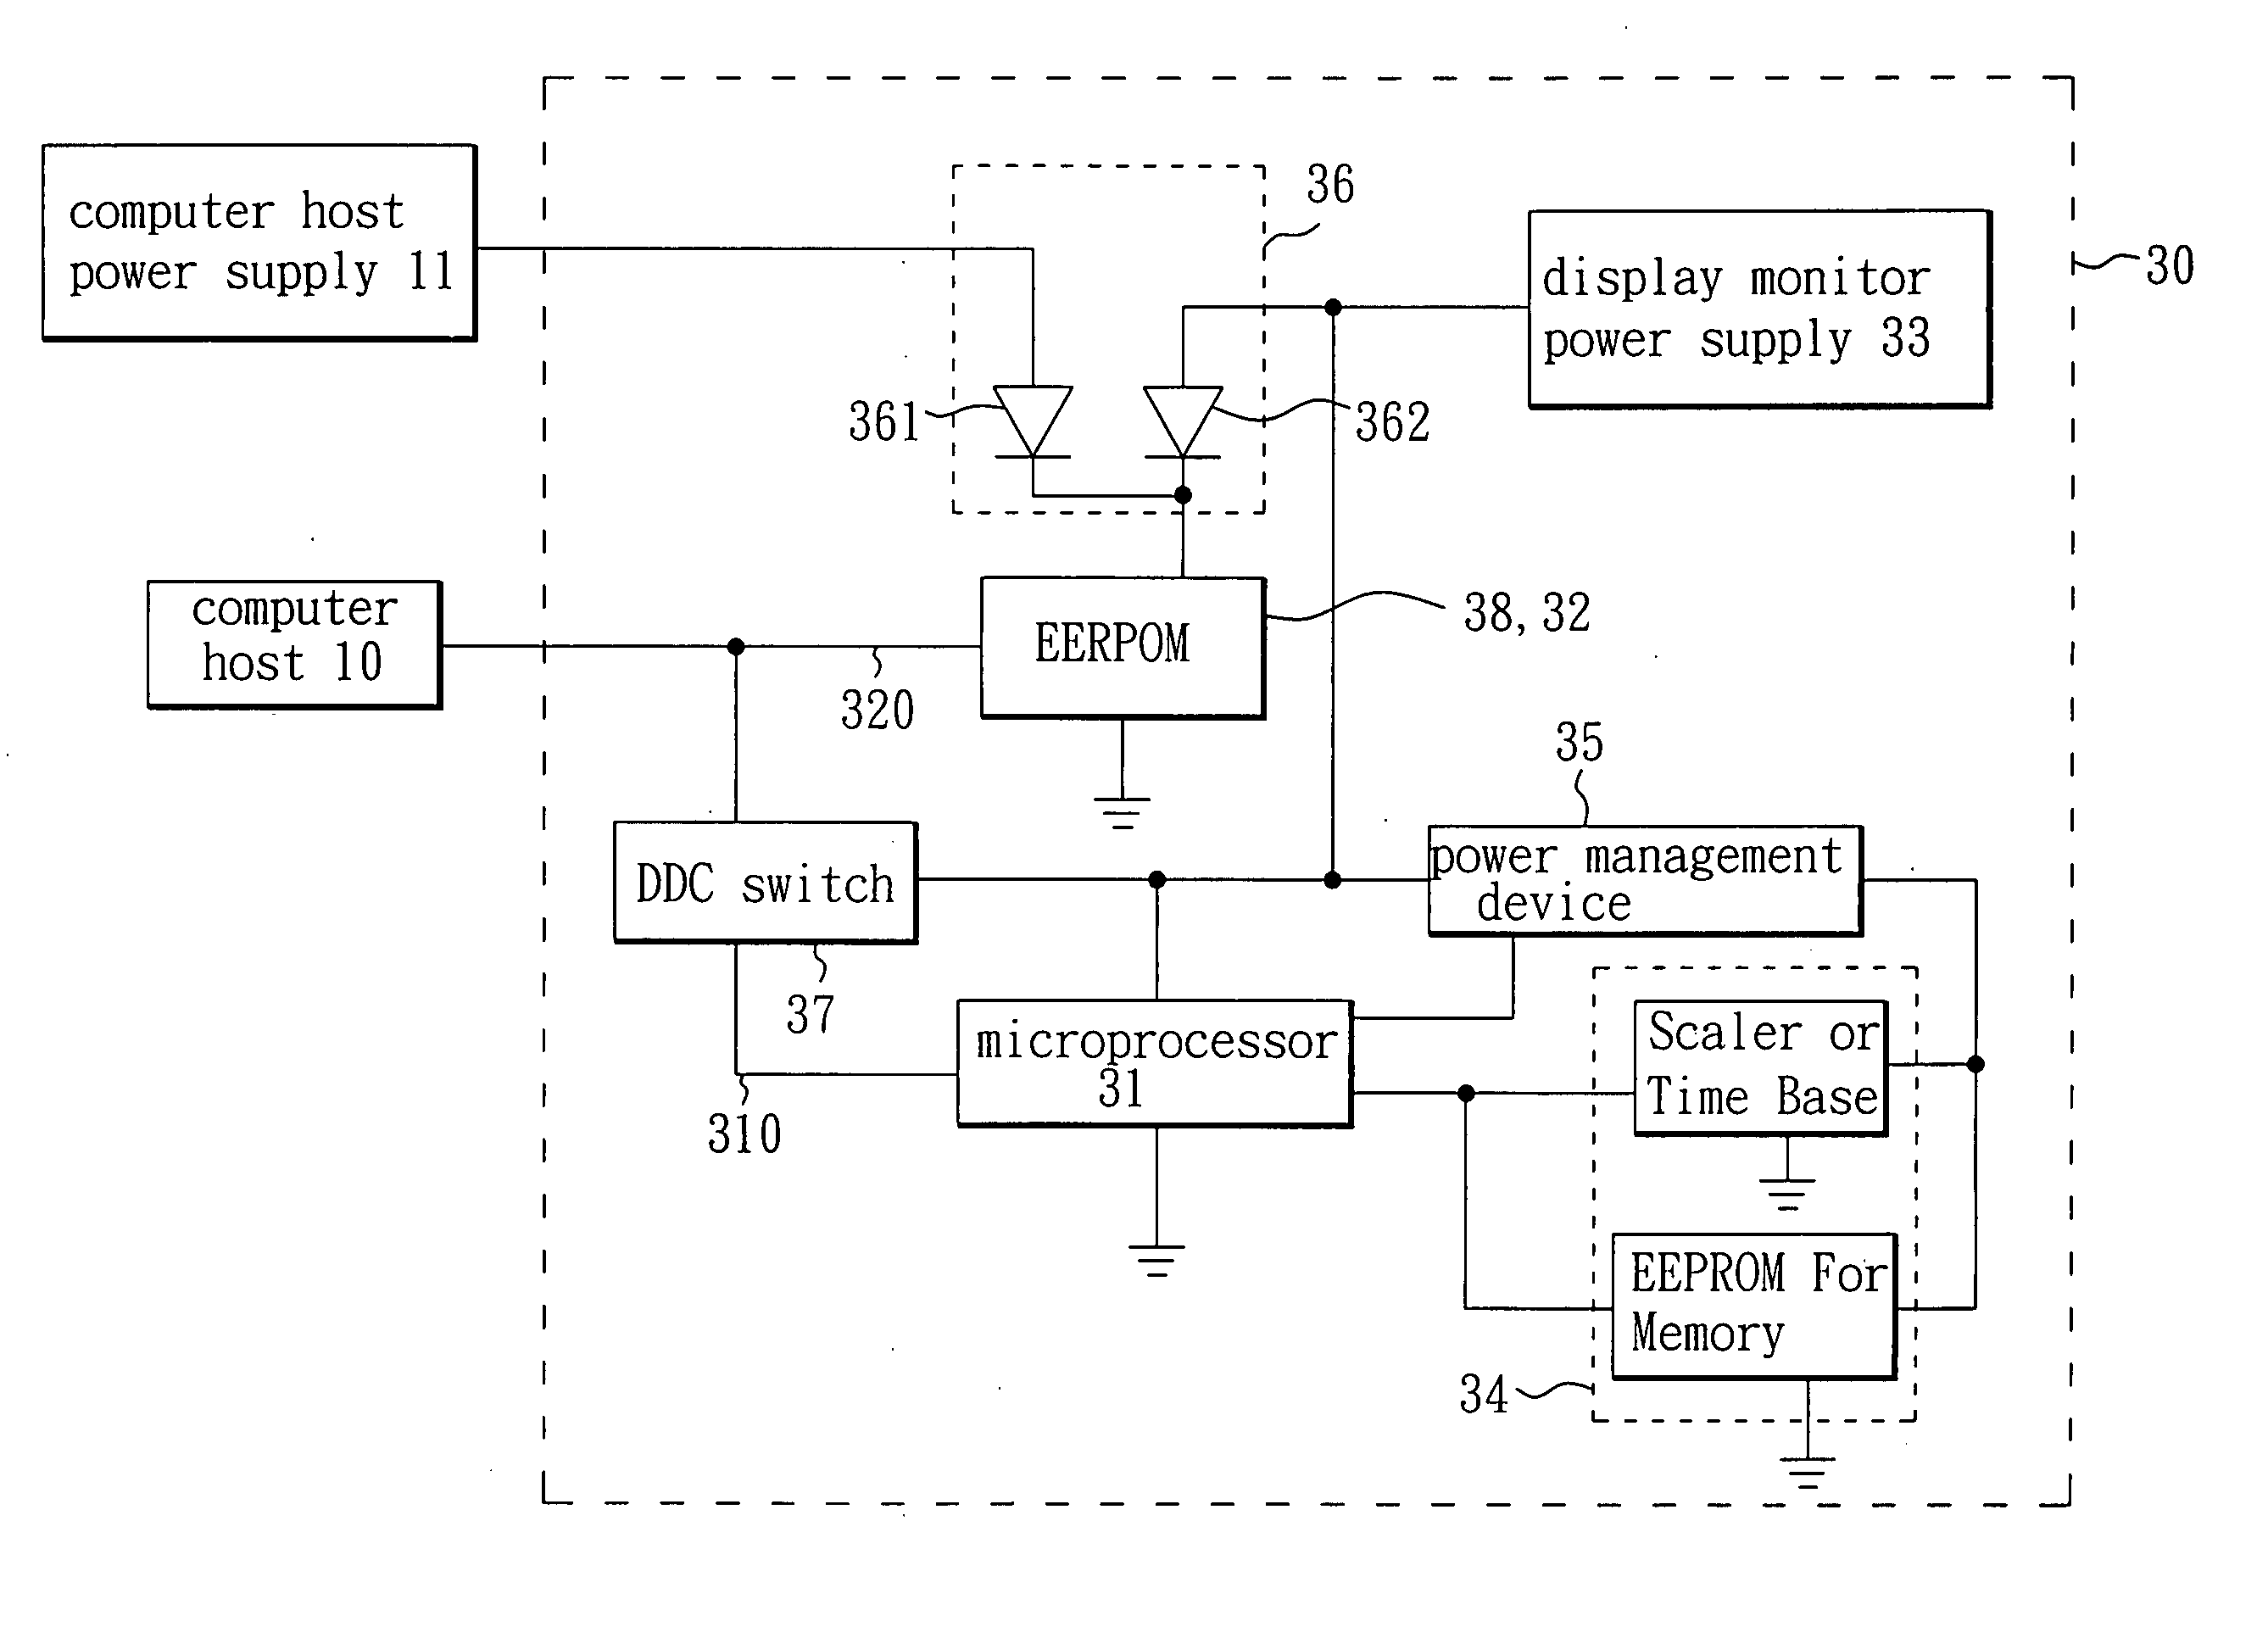 Display monitor with a common display data channel